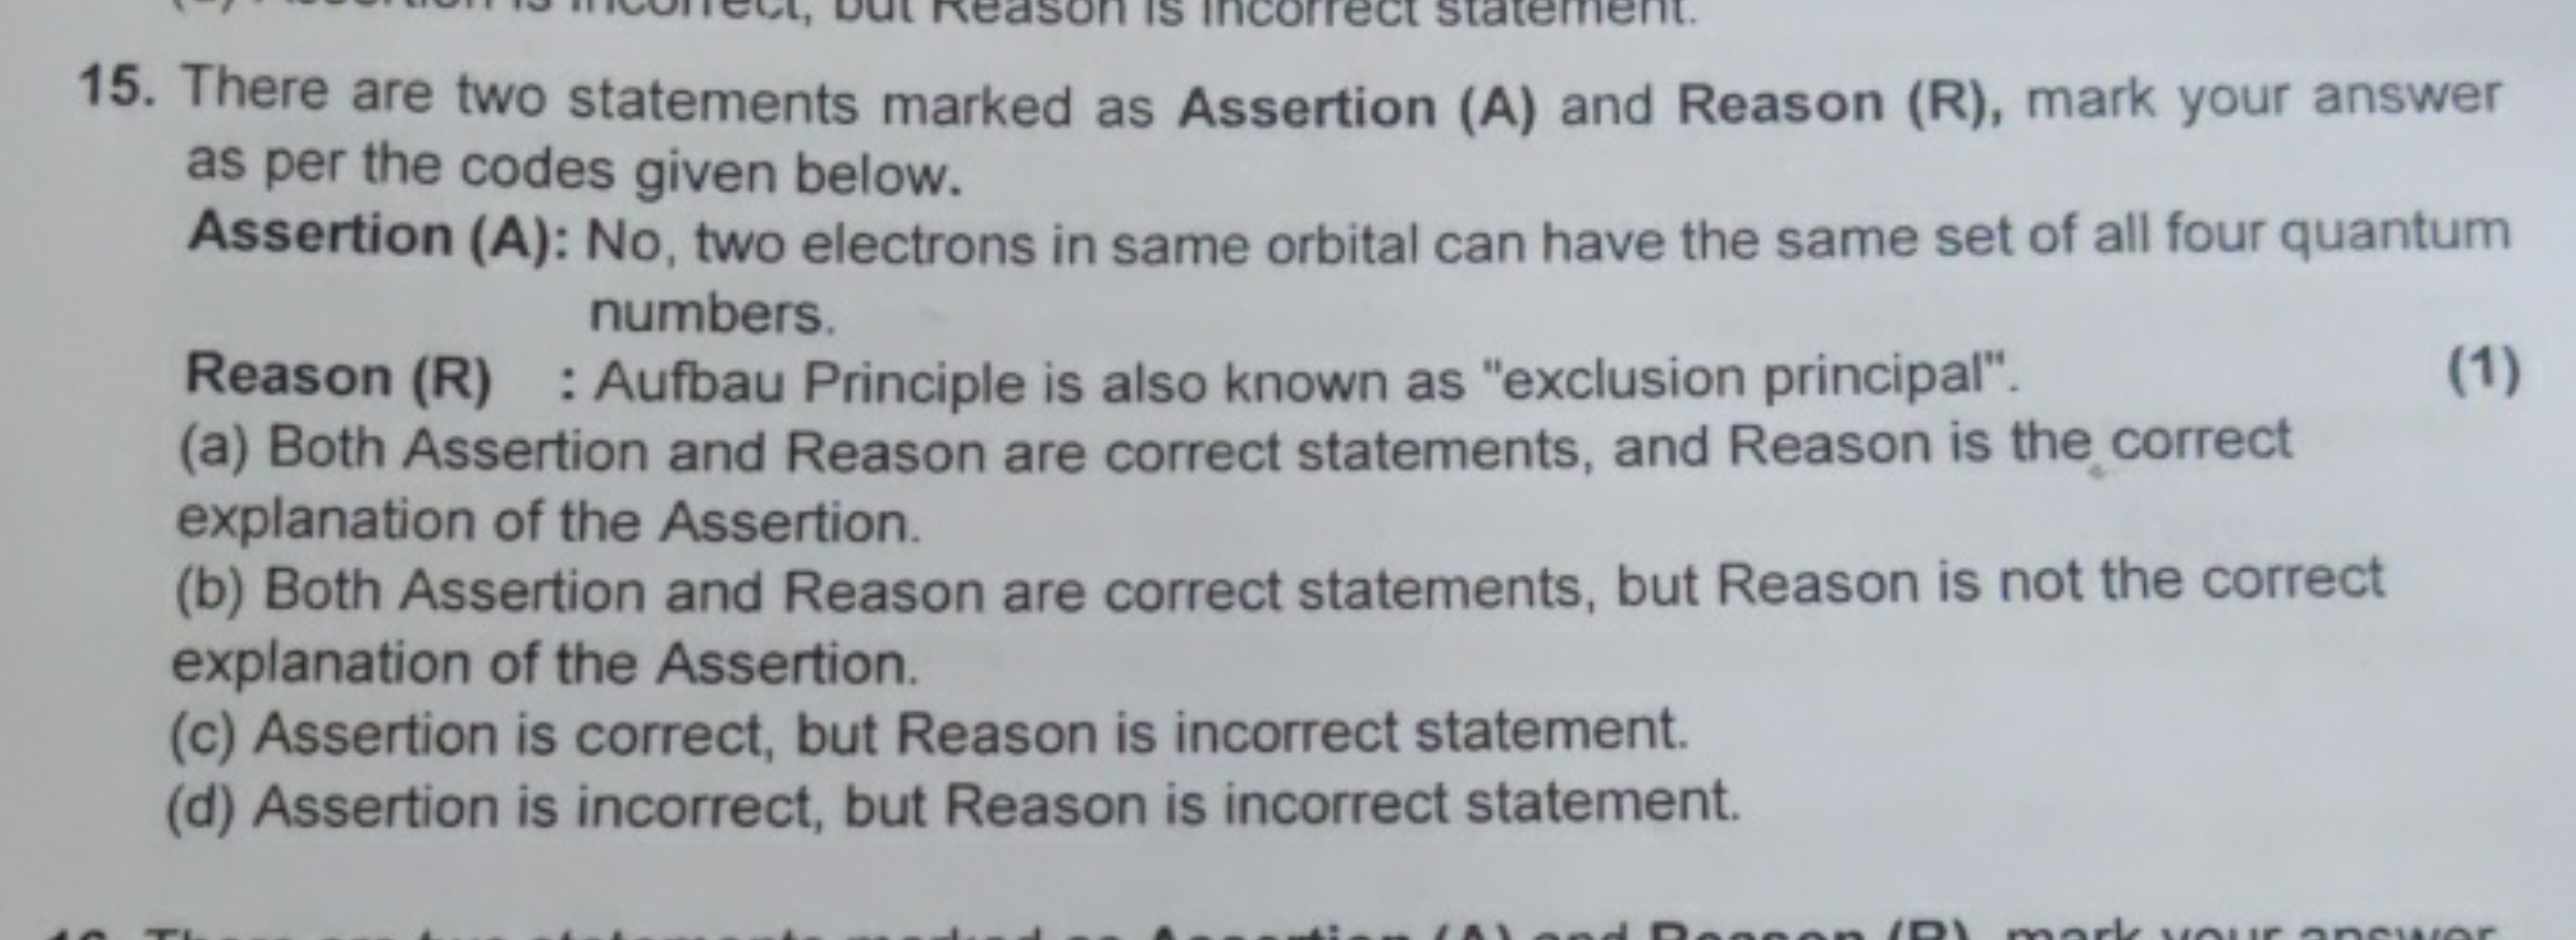 There are two statements marked as Assertion (A) and Reason (R), mark 